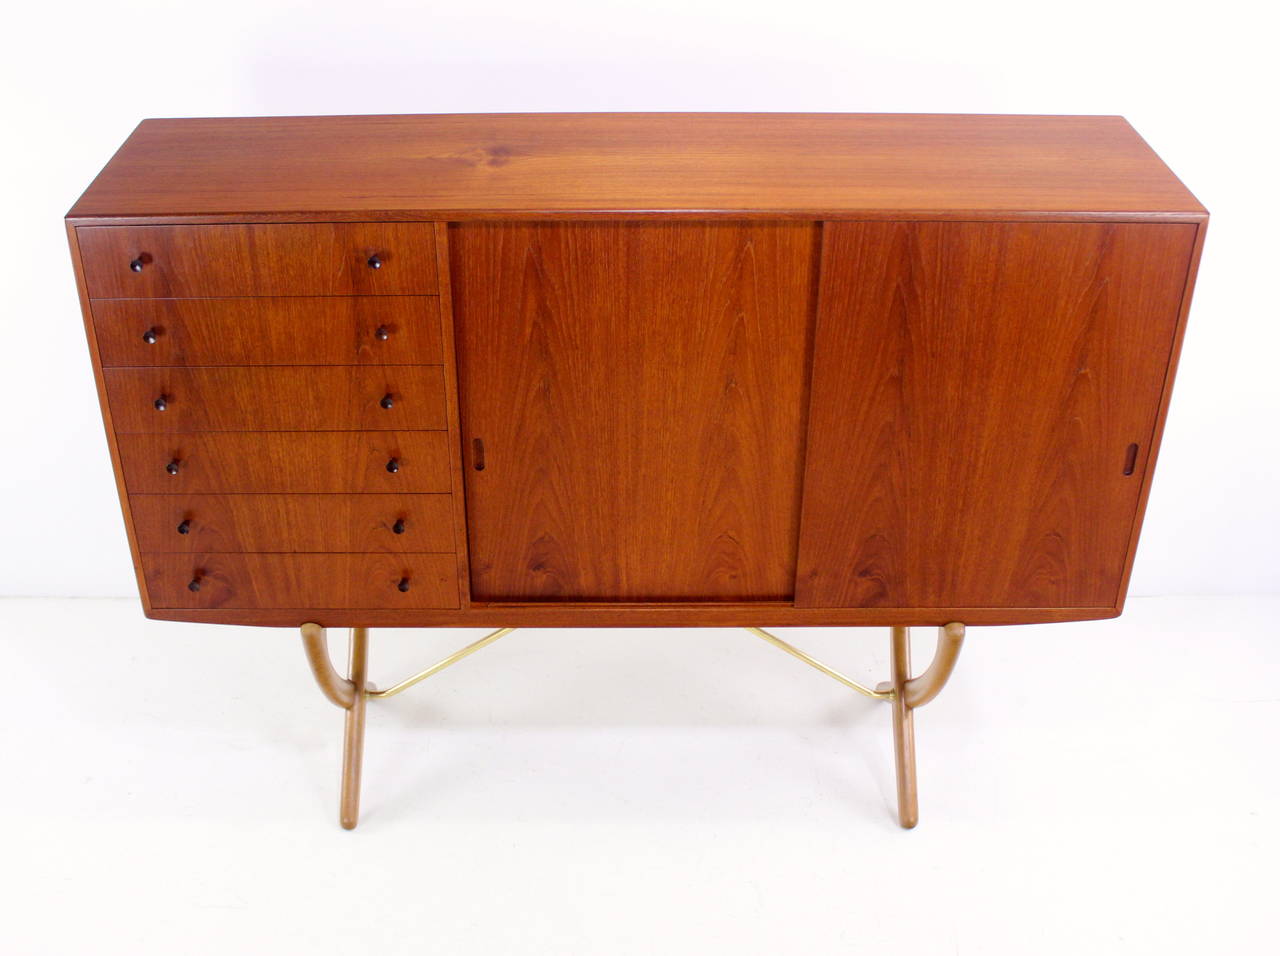 Danish modern cabinet designed by Hans Wegner in 1951.
Carl Hansen & Sons, maker. Model CH304.
Teak cabinet with oak interior.
Extraordinary oak and solid brass saber legs.
Six pull-out trays on left.
Doors slide open to adjustable shelving in